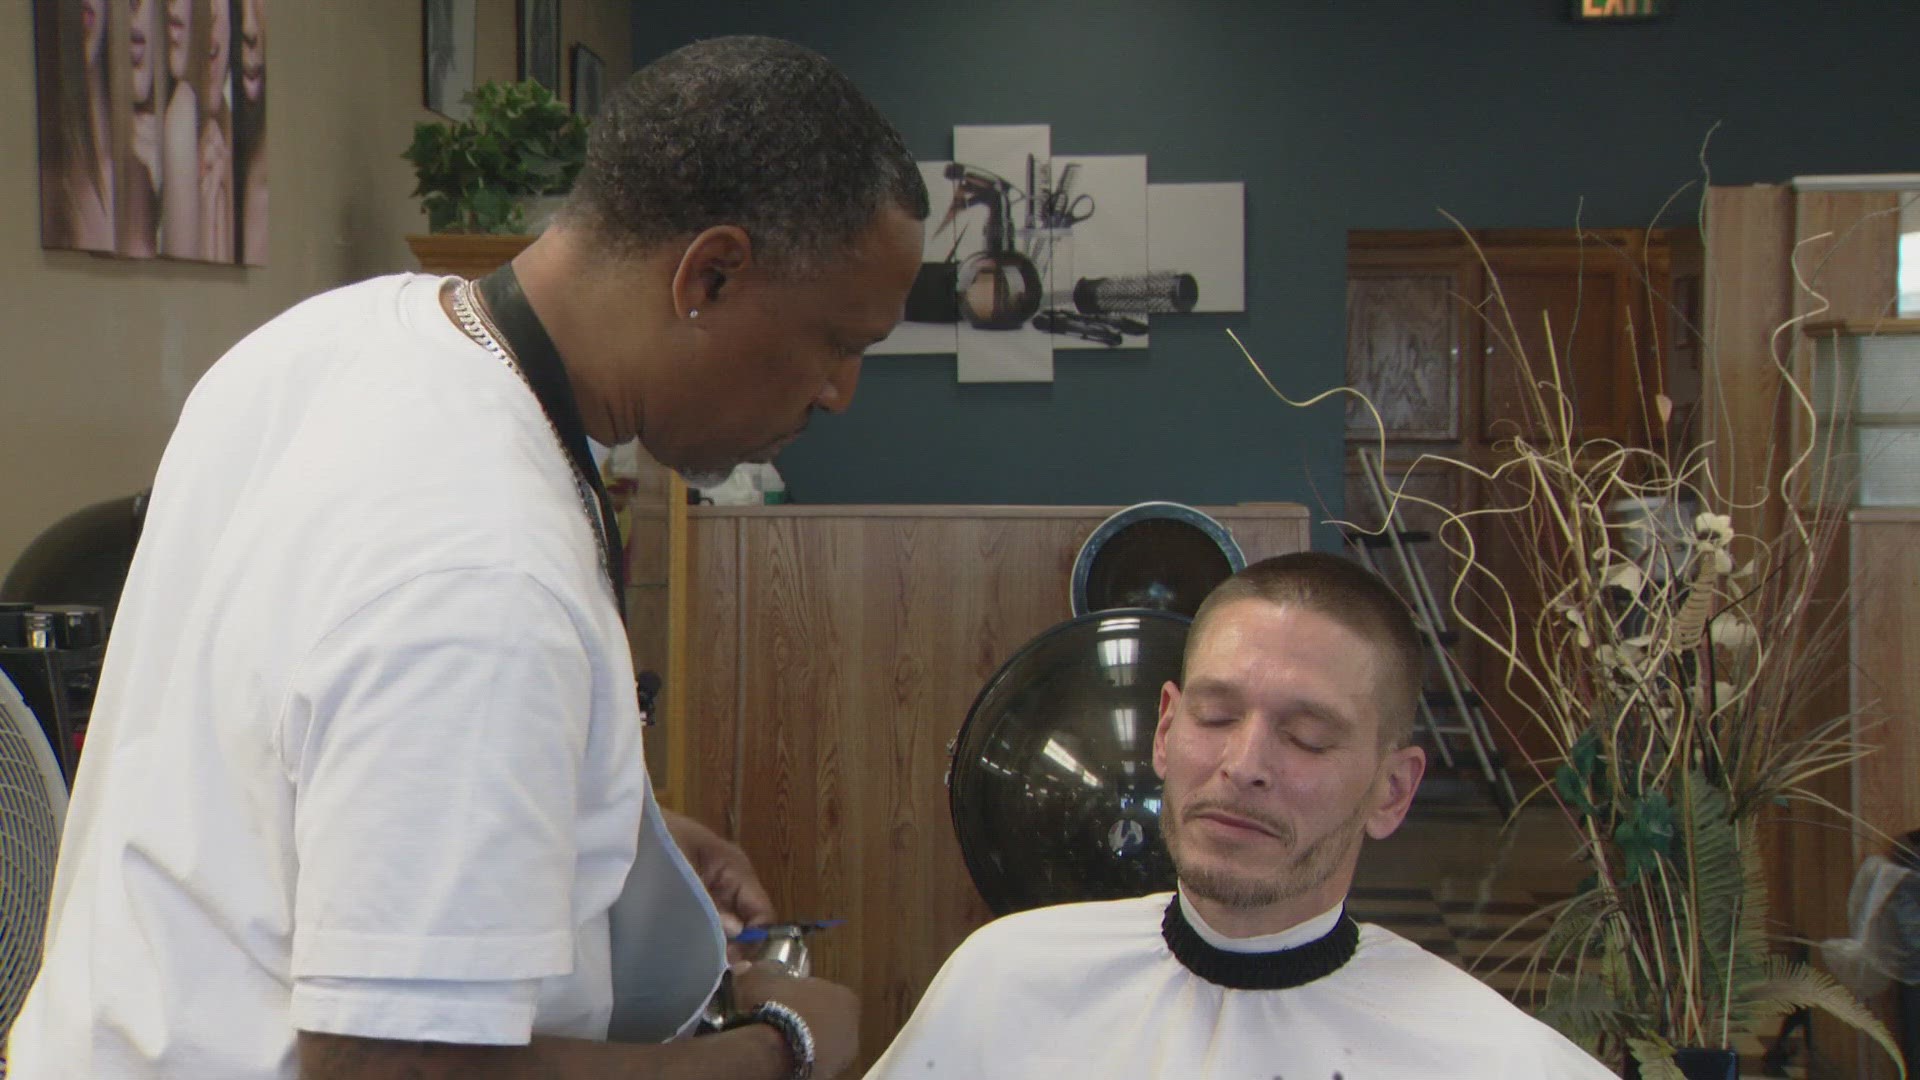 Taza "T" Gillespie was giving free haircuts to the unhoused in Denver when he met Nick, who says T helped him get back on his feet.